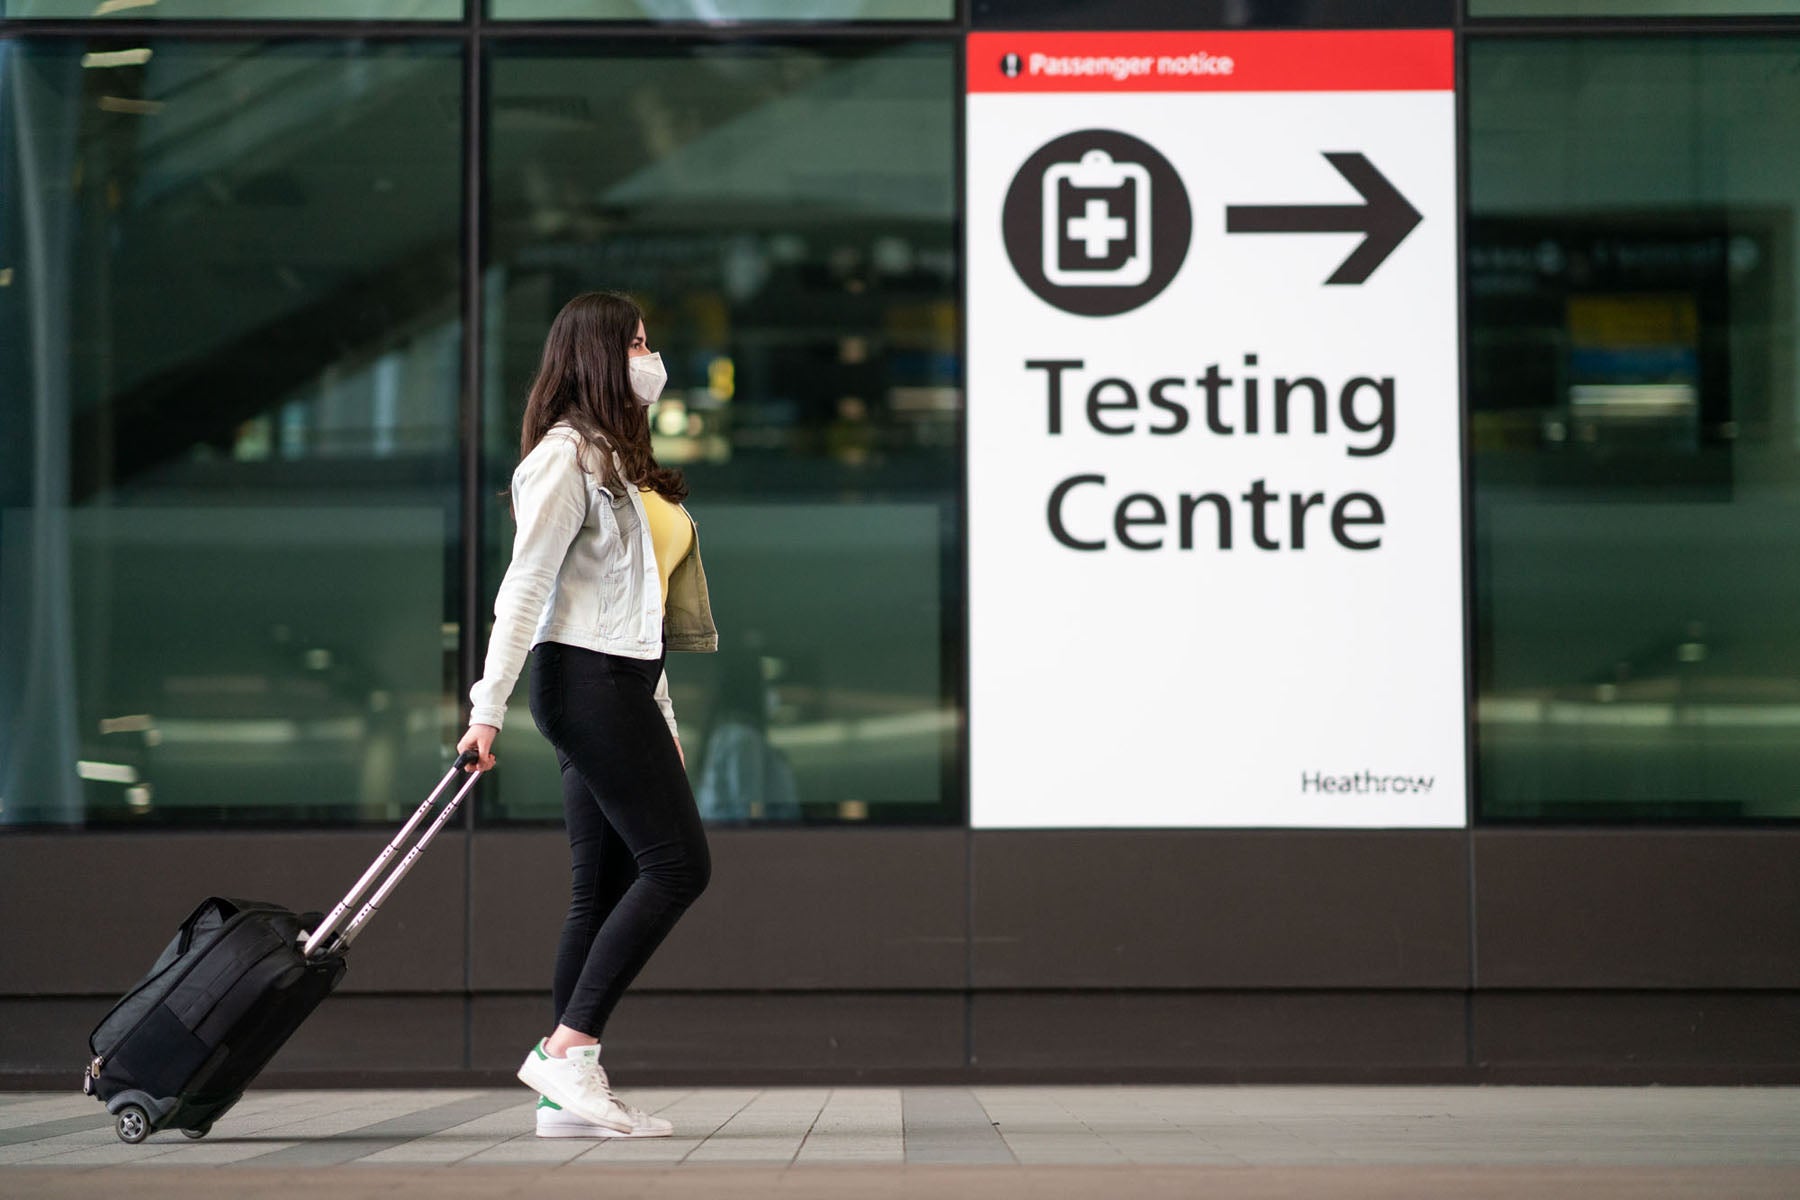 Passengers arriving from China at Heathrow can decide whether or not to take a voluntary Covid test as part of ‘surveillance’ program